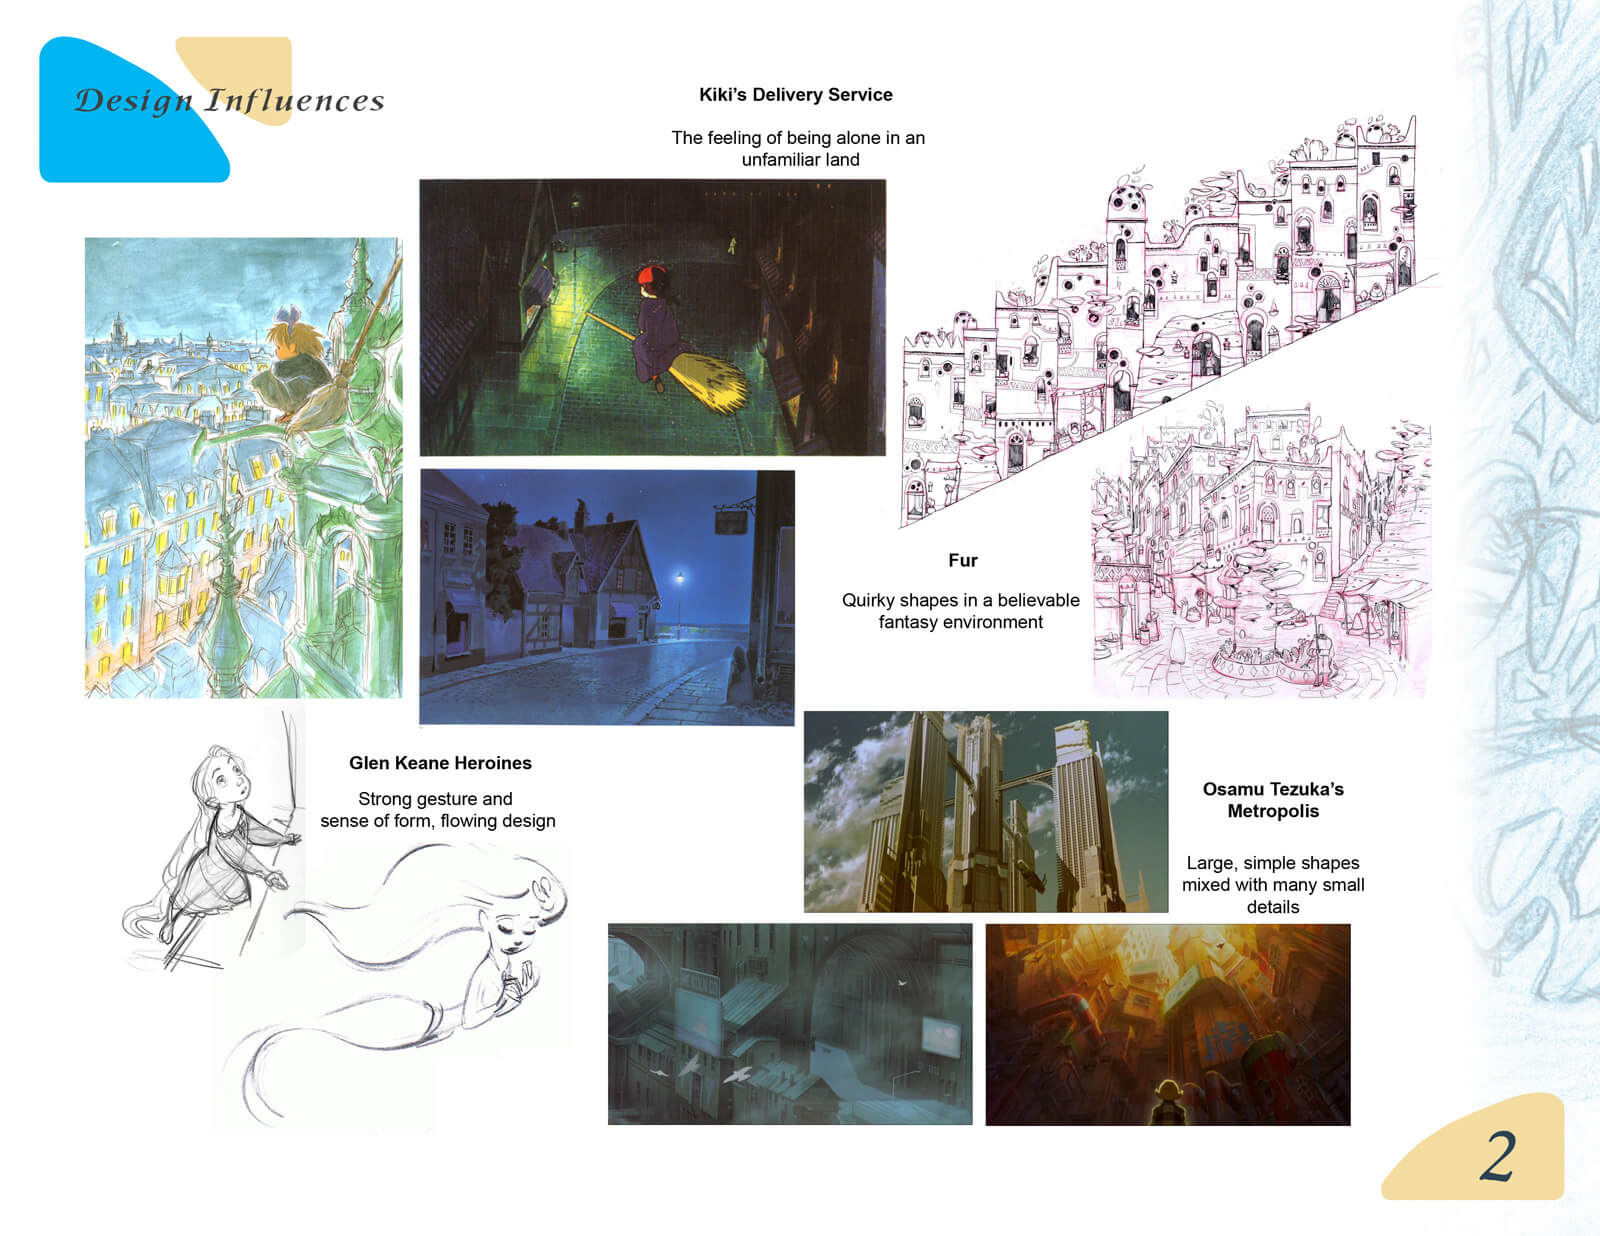 Presentation slide depicting the design influences of Beneath the Night Sea, including Kiki's Delivery Service and Metropolis